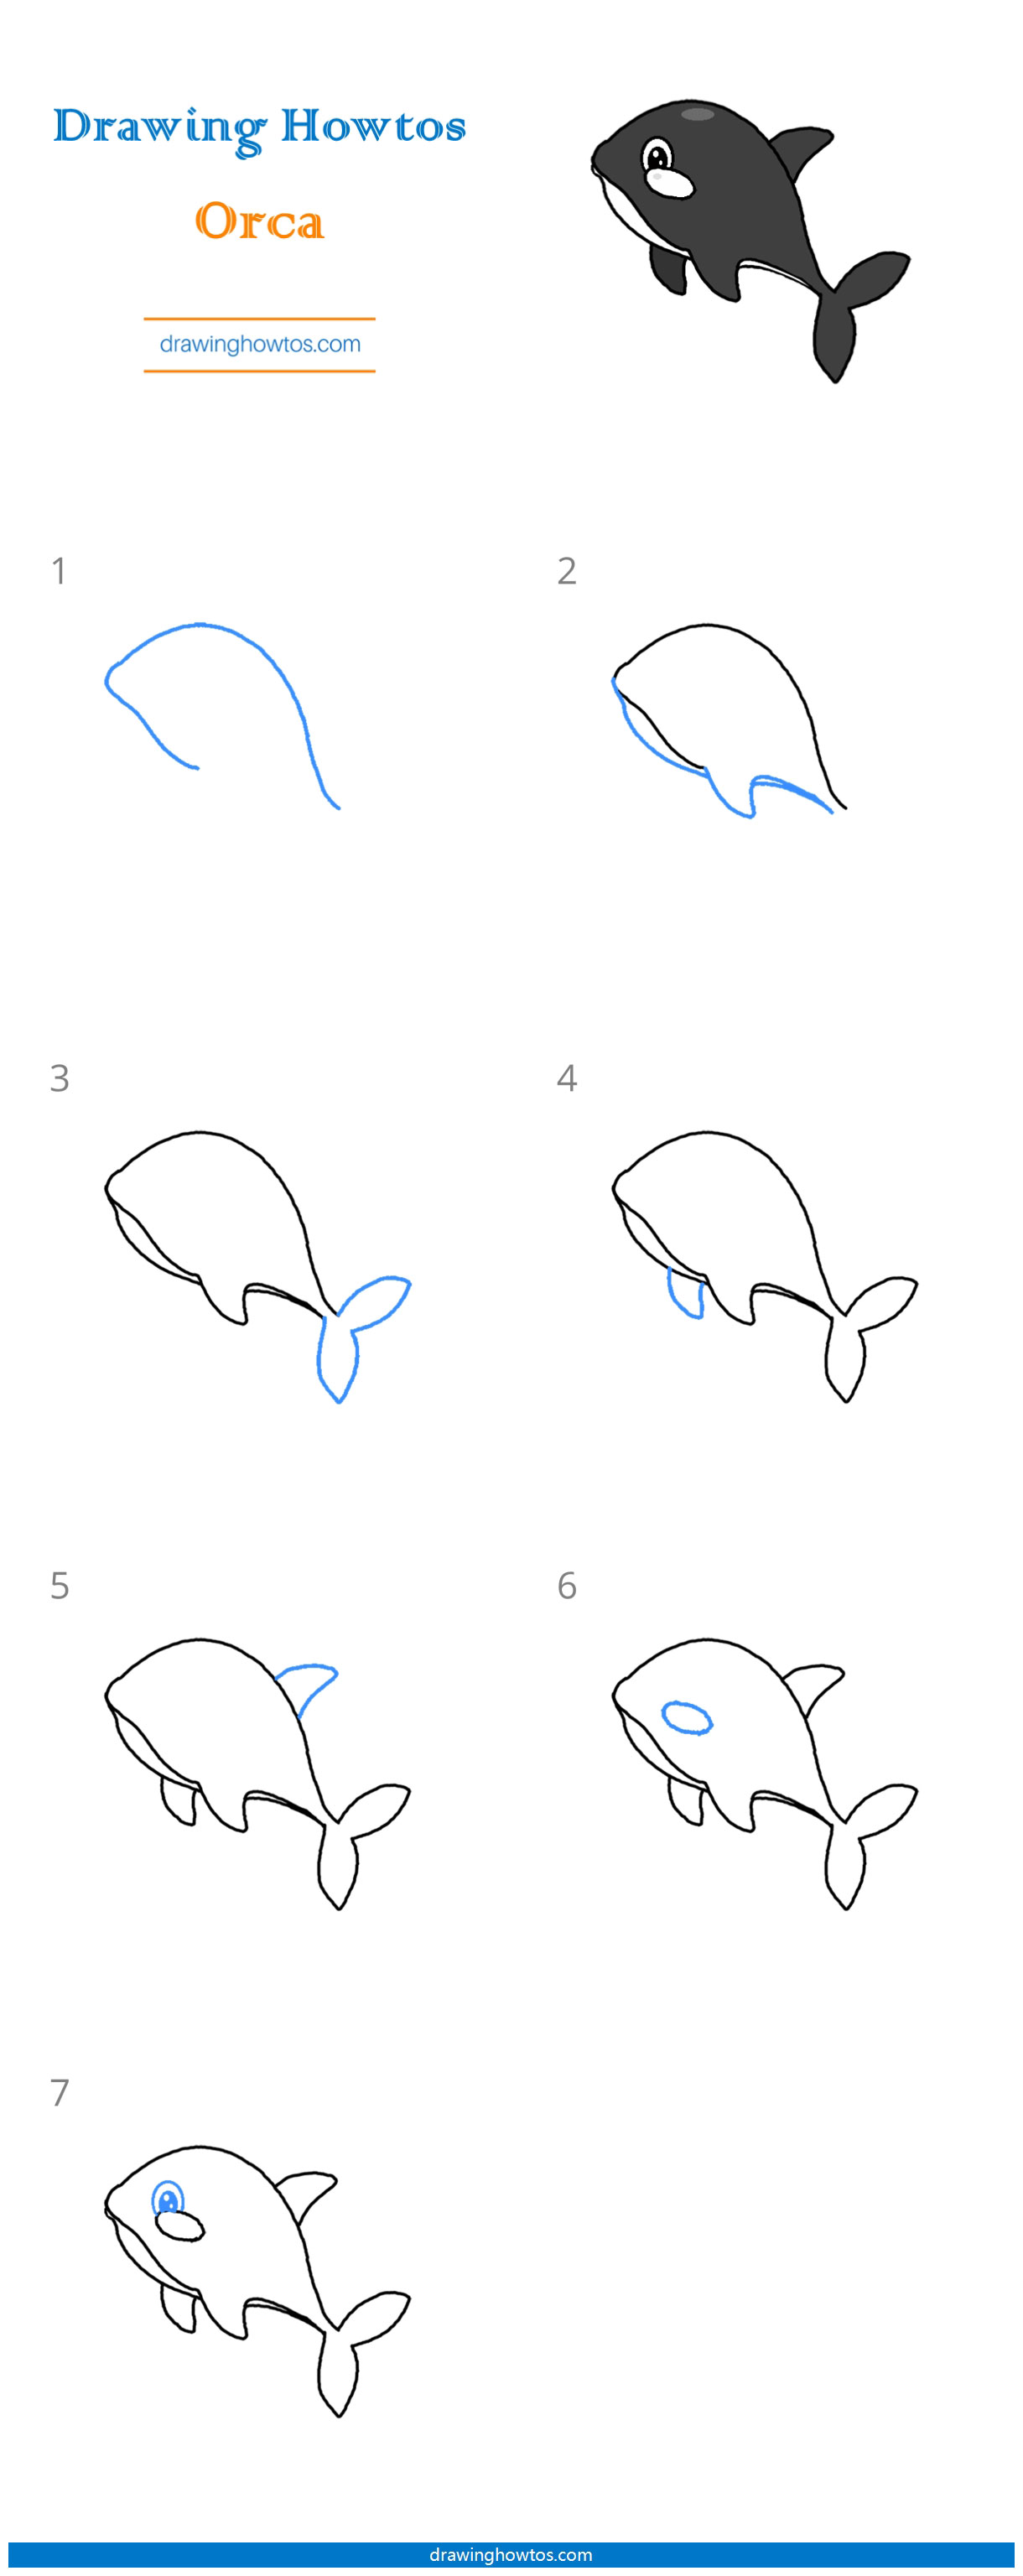 How to Draw an Orca - Step by Step Easy Drawing Guides - Drawing Howtos